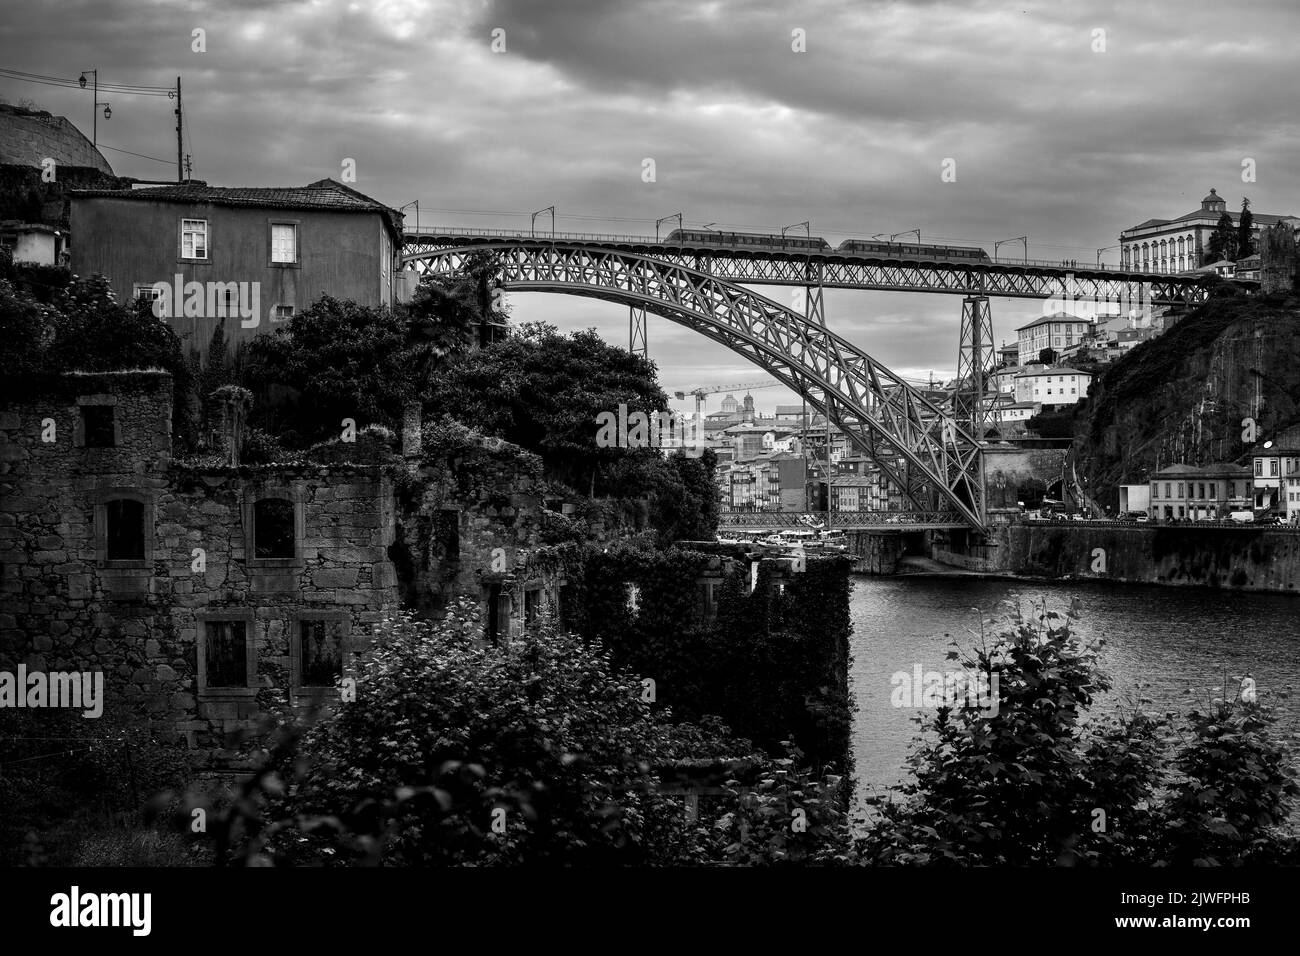 Abandoned buildings on the banks of the Douro with Dom Luis I Bridge in the background, Porto, Portugal. Black and  white photo. Stock Photo